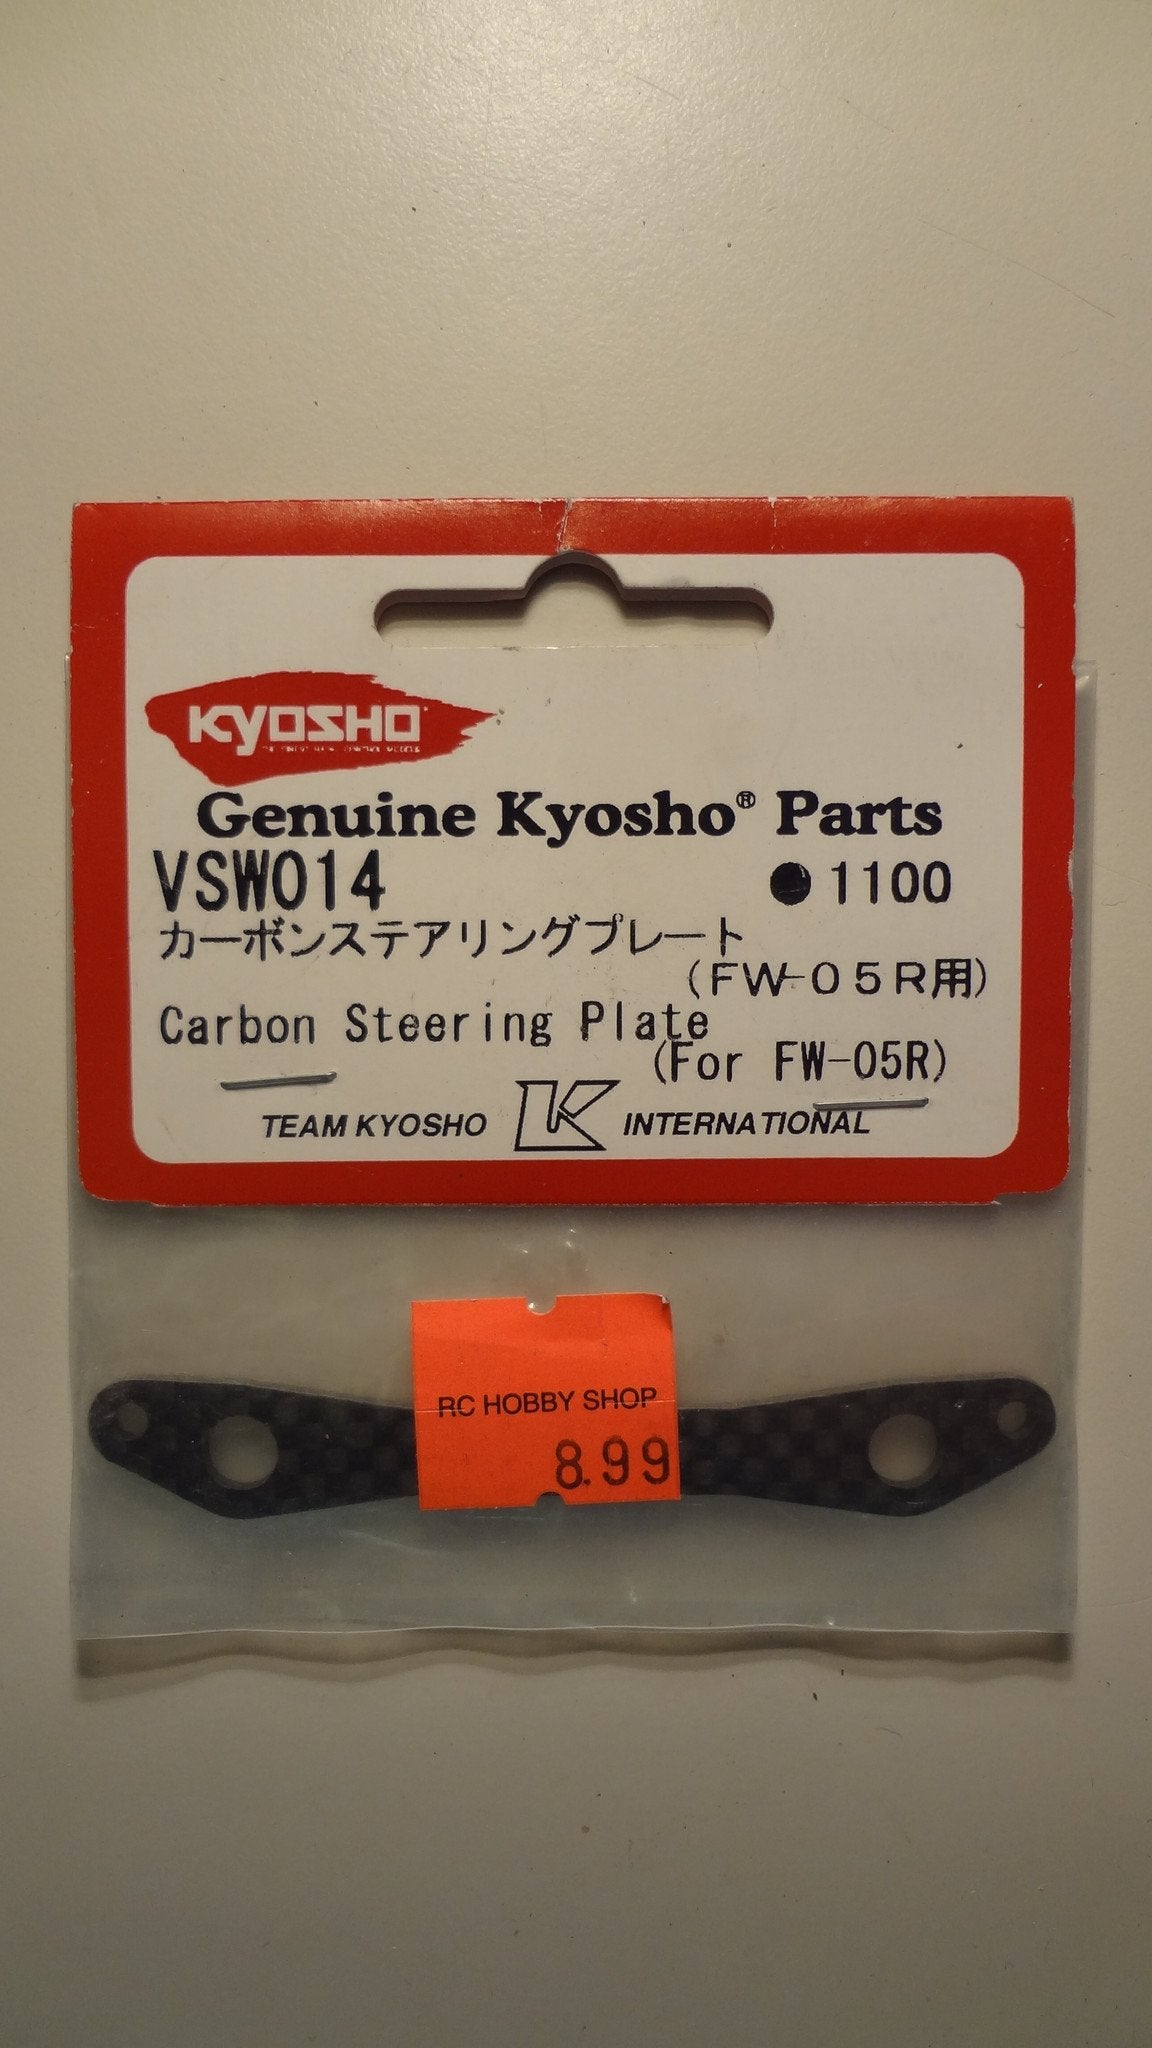 CARBON STEERING PLATE (FOR FW-05R)